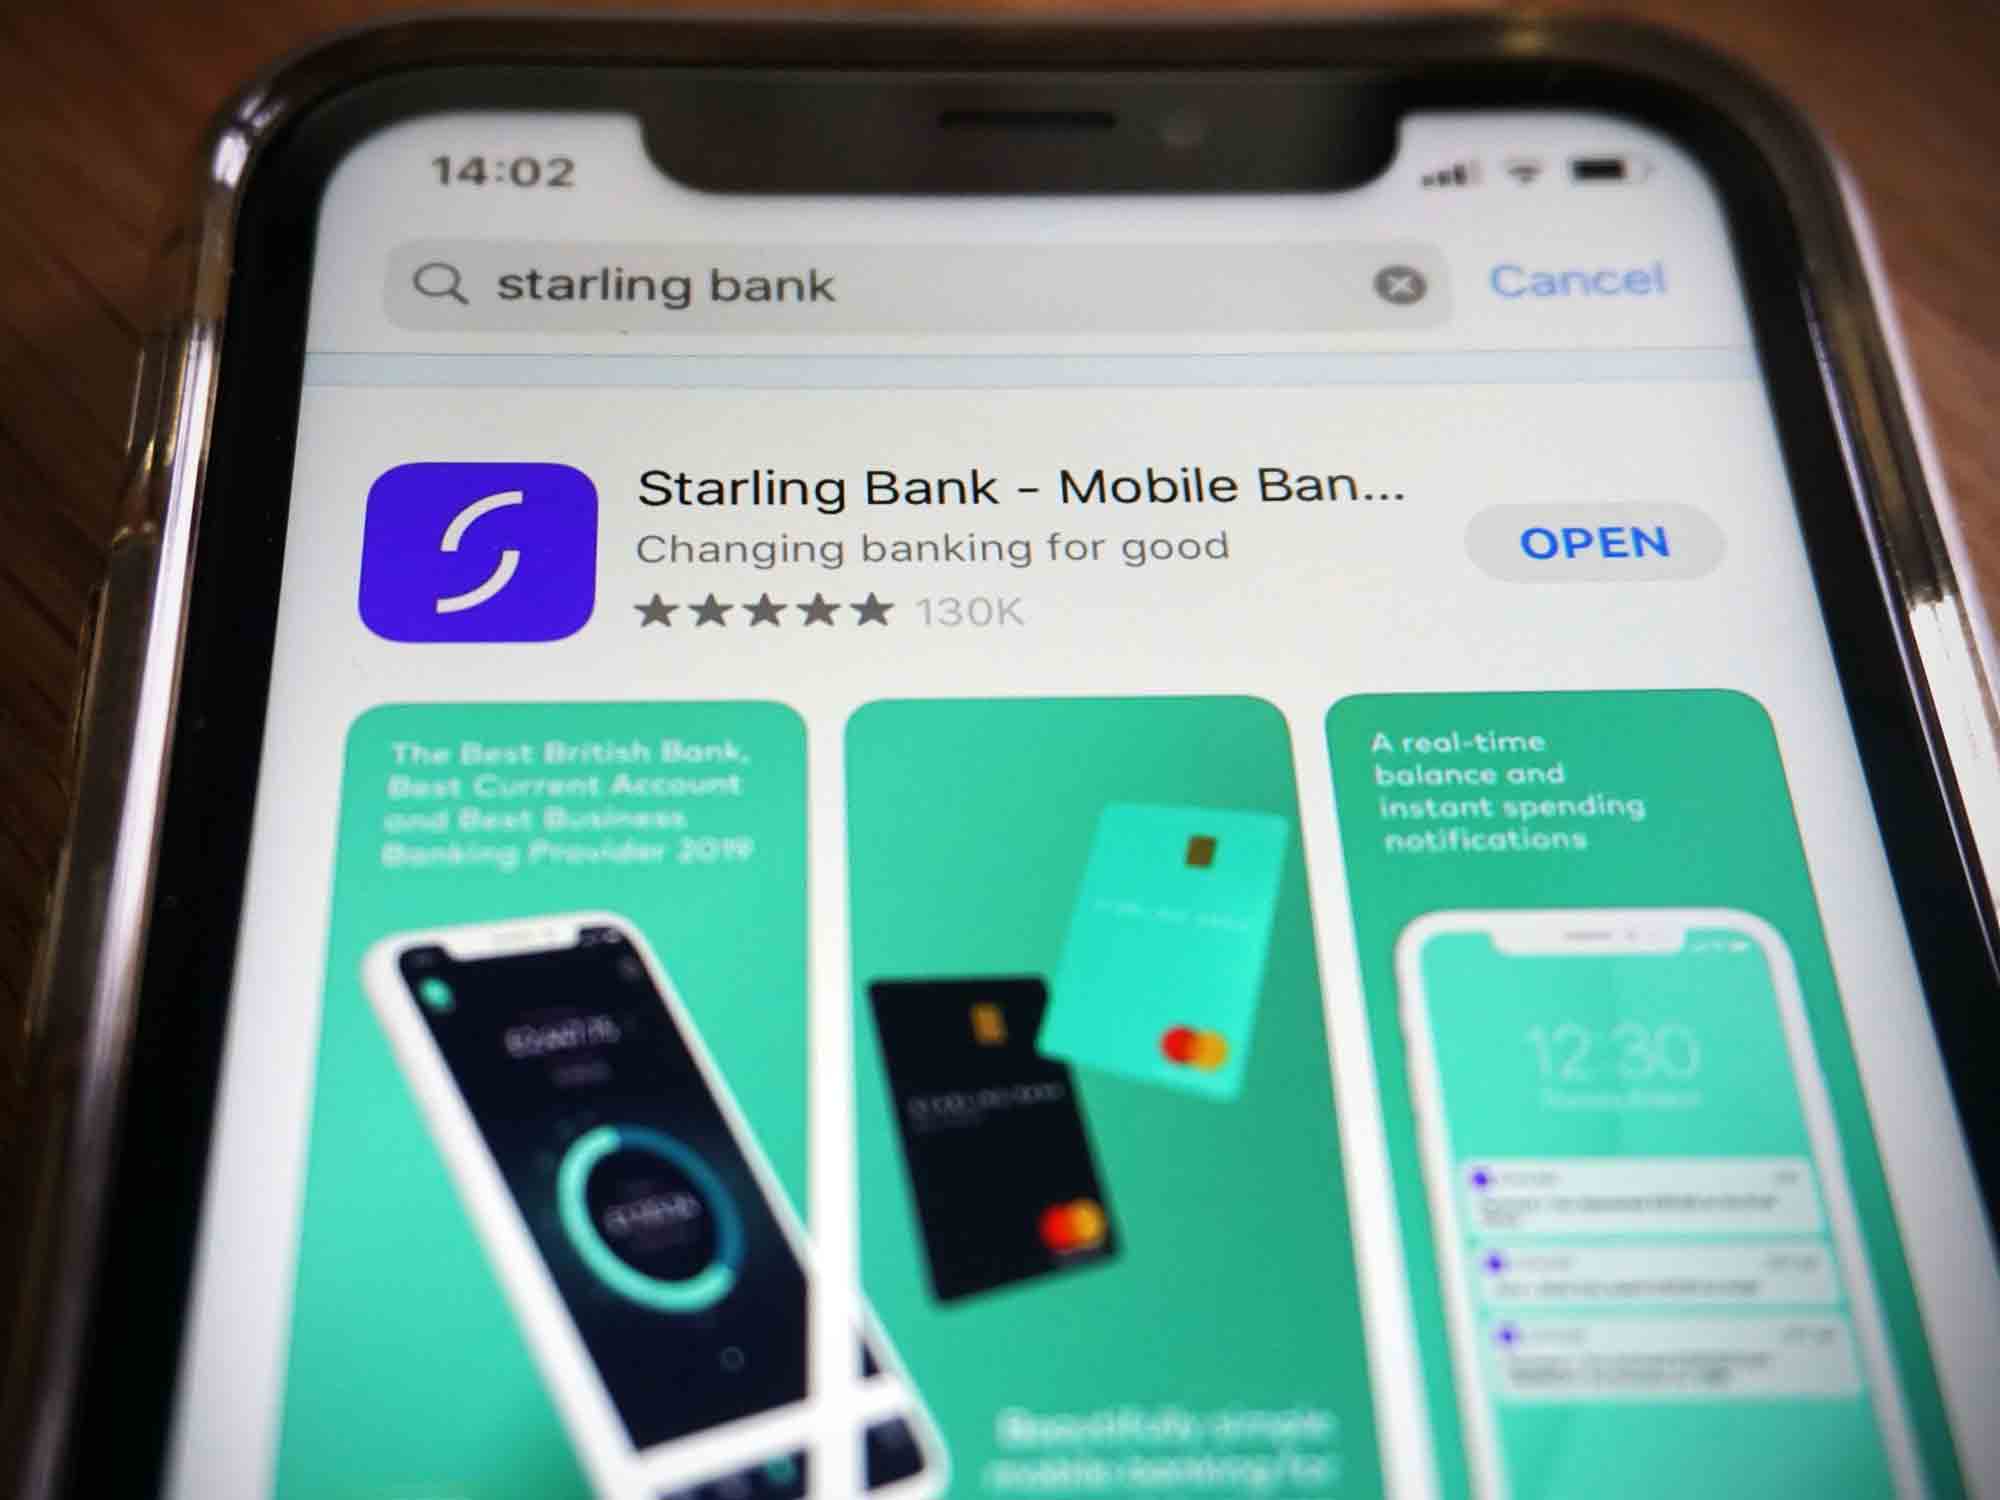 The Starling Bank app.